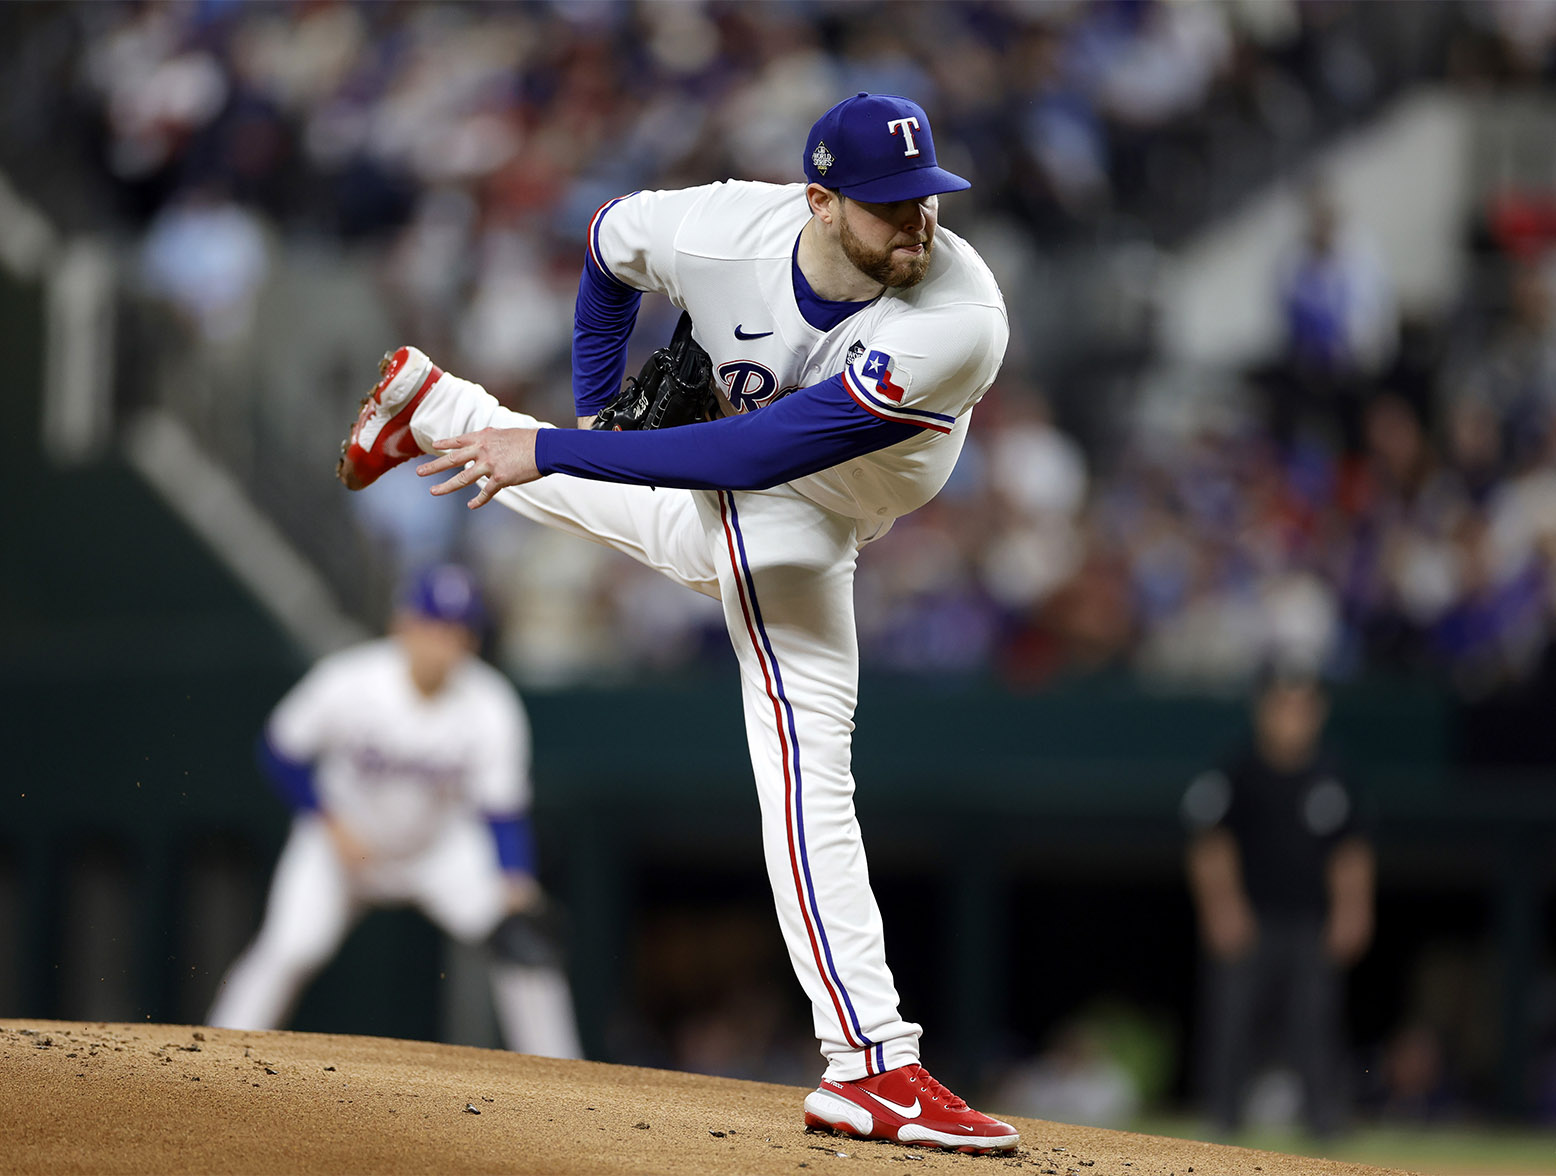 ARLINGTON, TEXAS - OCTOBER 28: Jordan Montgomery #52 of the Texas Rangers pitches in the first inning against the Arizona Diamondbacks during Game Two of the World Series at Globe Life Field on October 28, 2023 in Arlington, Texas. (Photo by Carmen Mandato/Getty Images)